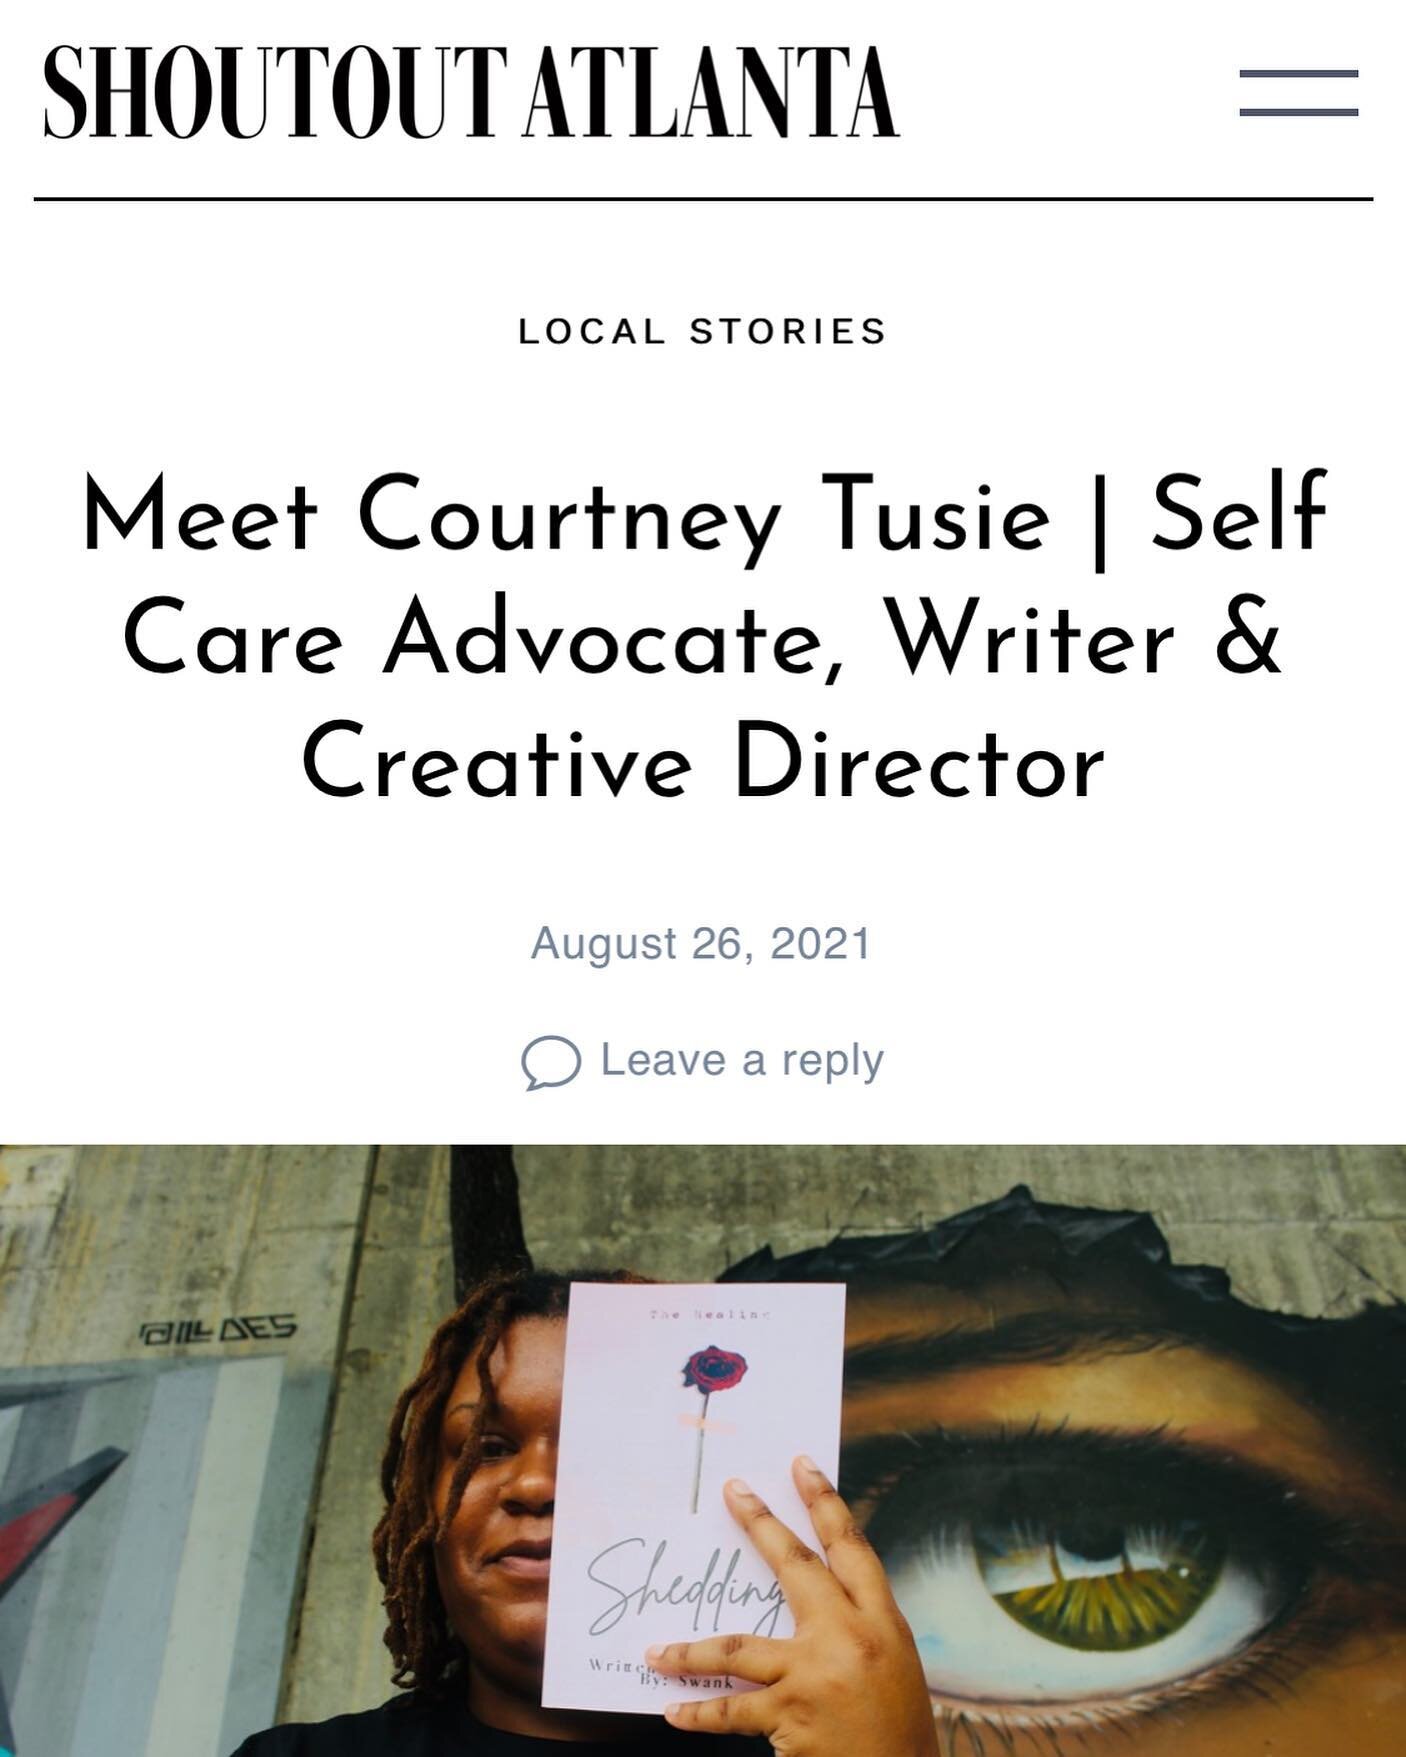 Mama I made it 😬😁🤣 Thank you! Thank you thank you! @shoutoutatlantaofficial for this opportunity. 

.
.
.
.
.
.
.
.
.
.

#healingjourney #healingwork #shoutoutatlanta #interview #creativedirector #writer #author #indie #selfpublished #authorsofins